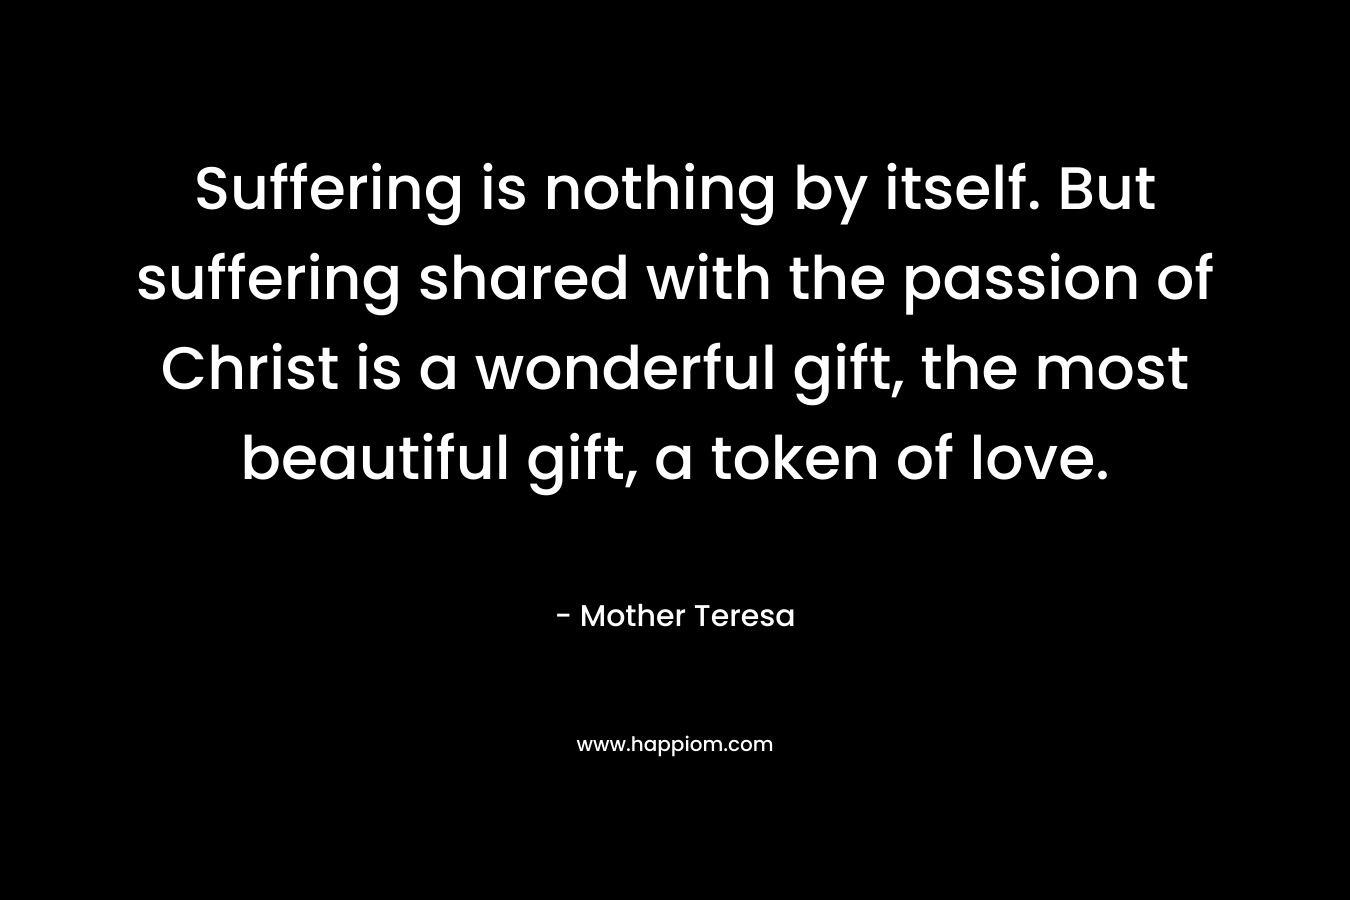 Suffering is nothing by itself. But suffering shared with the passion of Christ is a wonderful gift, the most beautiful gift, a token of love.